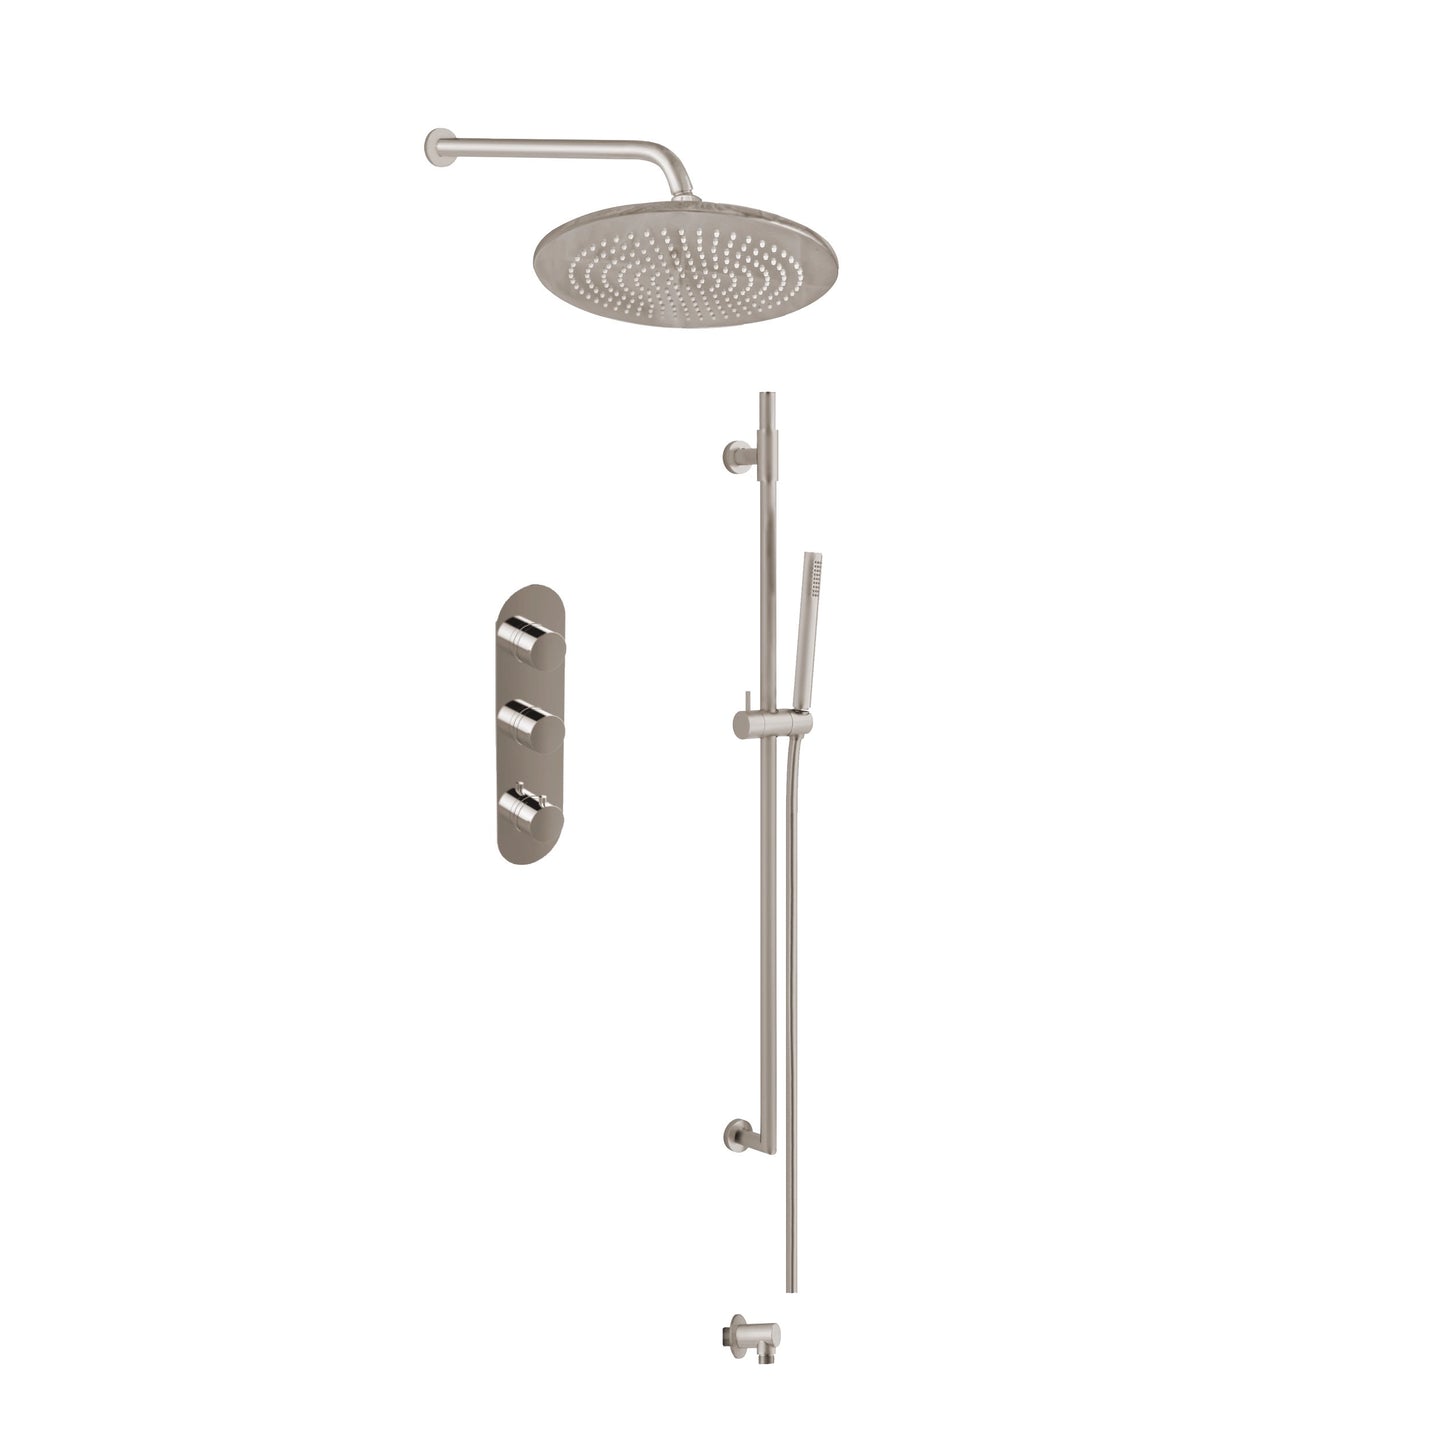 Aquadesign Products Shower Kit (Contempo X1600CT-A) - Brushed Nickel